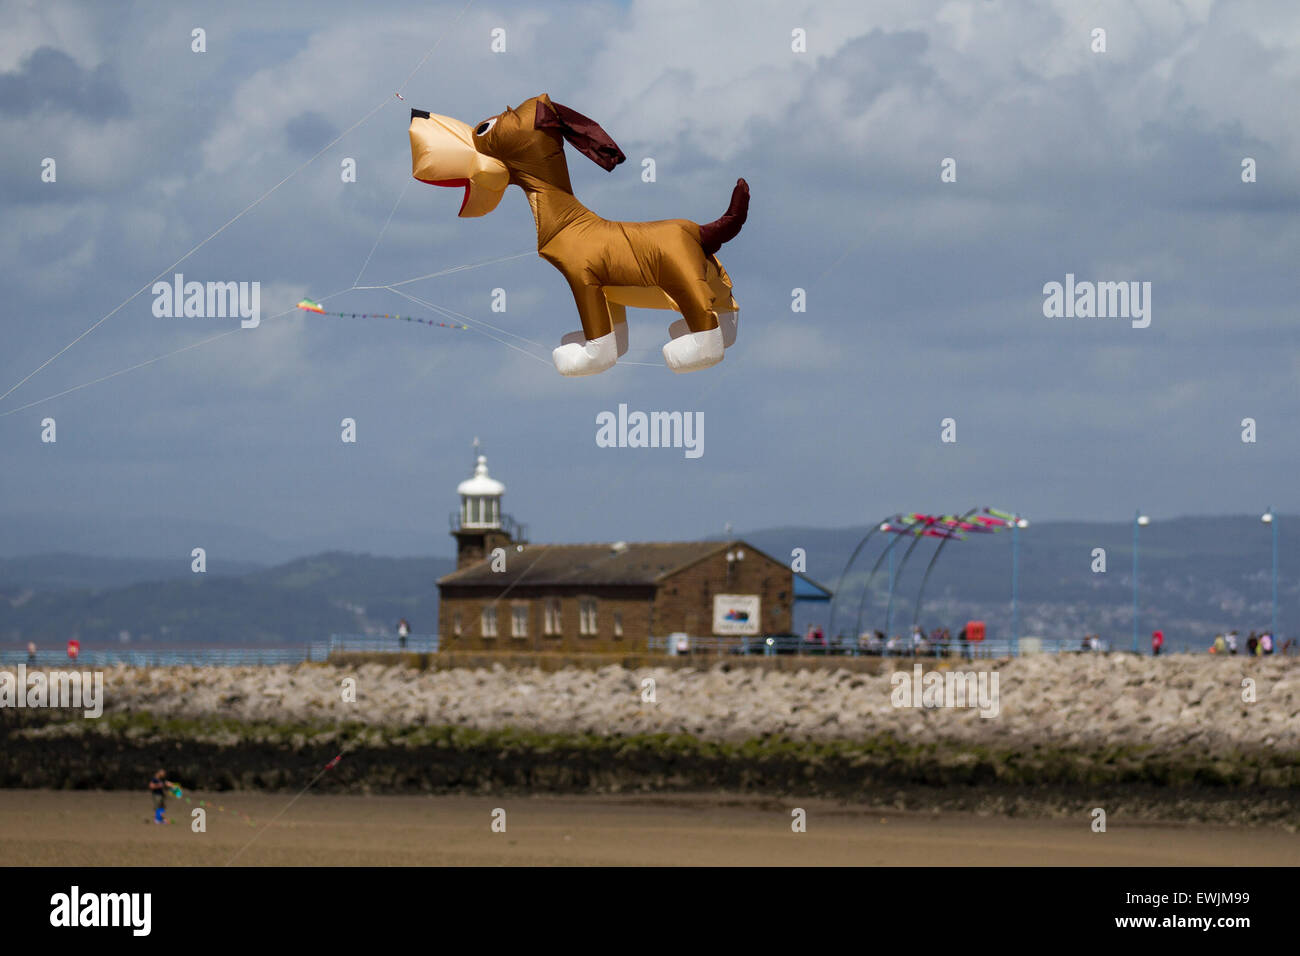 Big Inflatable comical cartoon dog flying over the Stone Jetty Light house in Morecambe. Catch The Wind Kite Festival an annual festival on Morecambe seafront, when for the whole day the skies are full of the most spectacular shapes, colours and flying creations.  Featured were animal kites of all kinds and sizes. Morecambe, Lancashire, UK June, 2015. Stock Photo